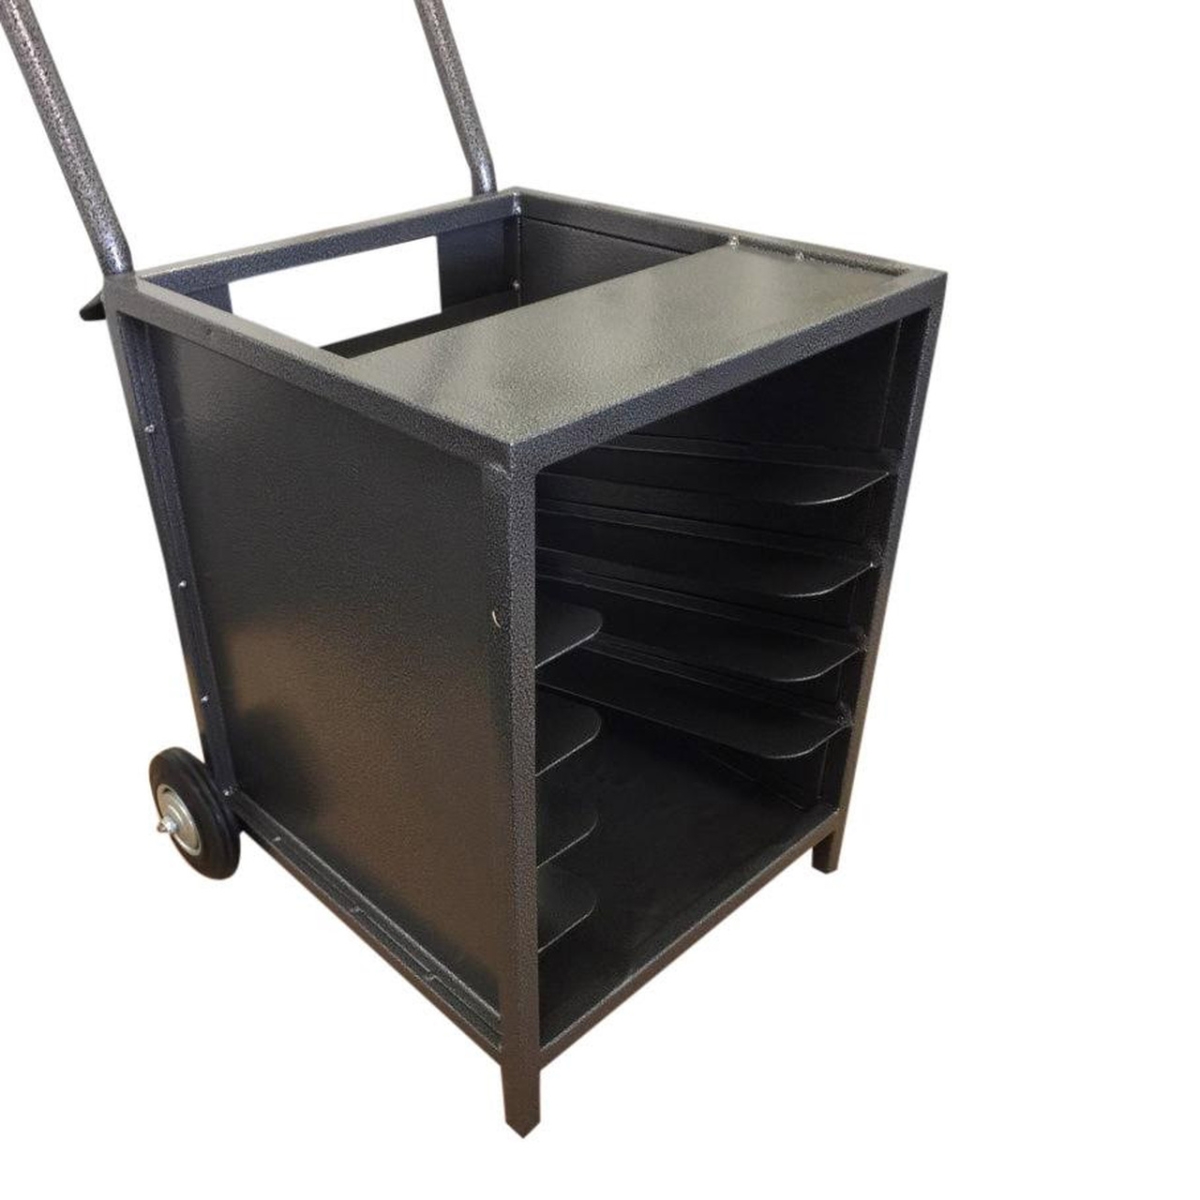 Picture of LW Measurement Cart Cart for Wheel Weighing Scales